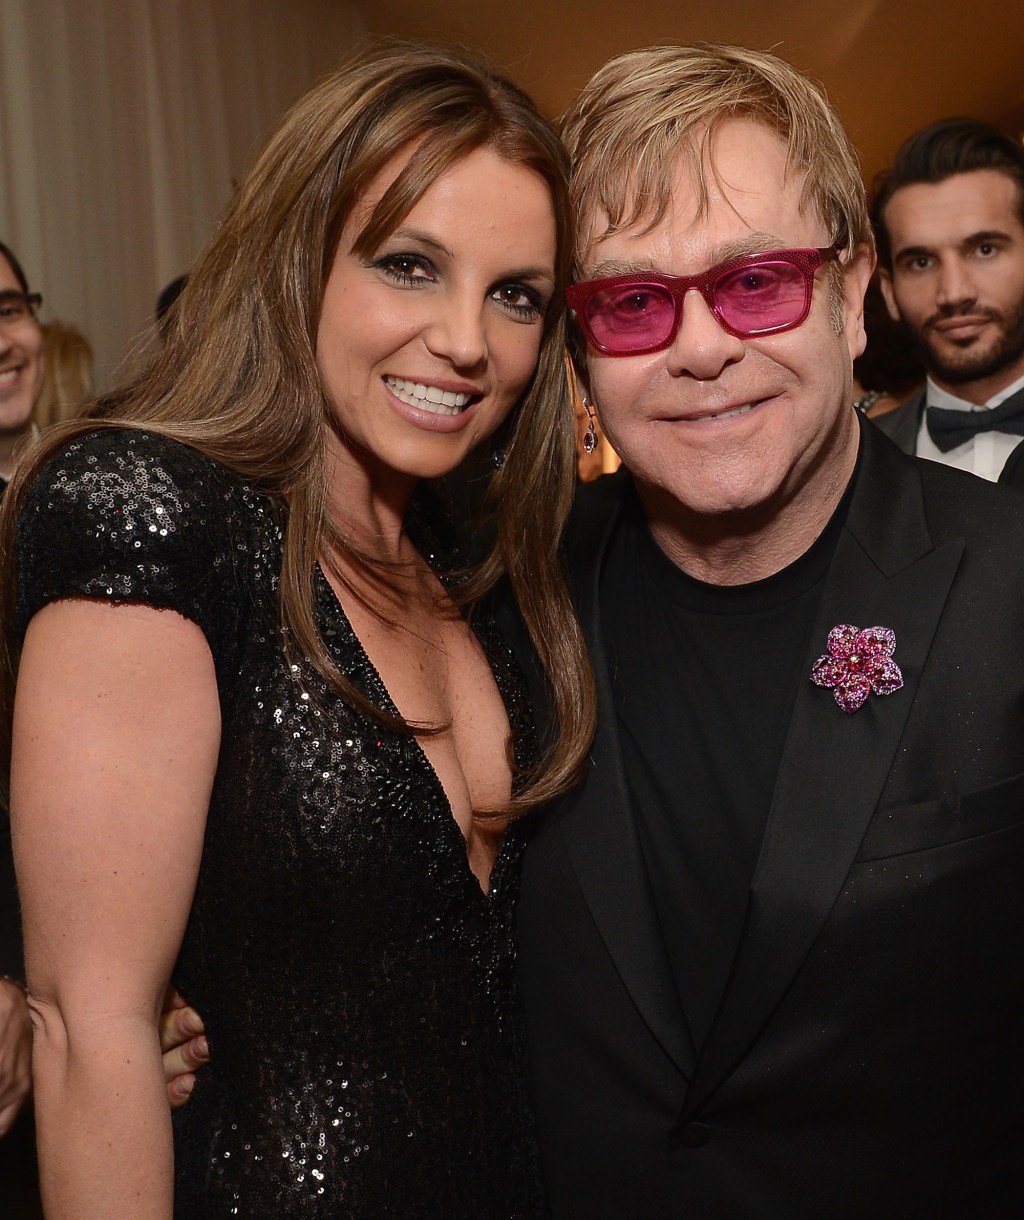 Britney Spears and Elton John at his AIDS Foundation Oscar party in 2013.